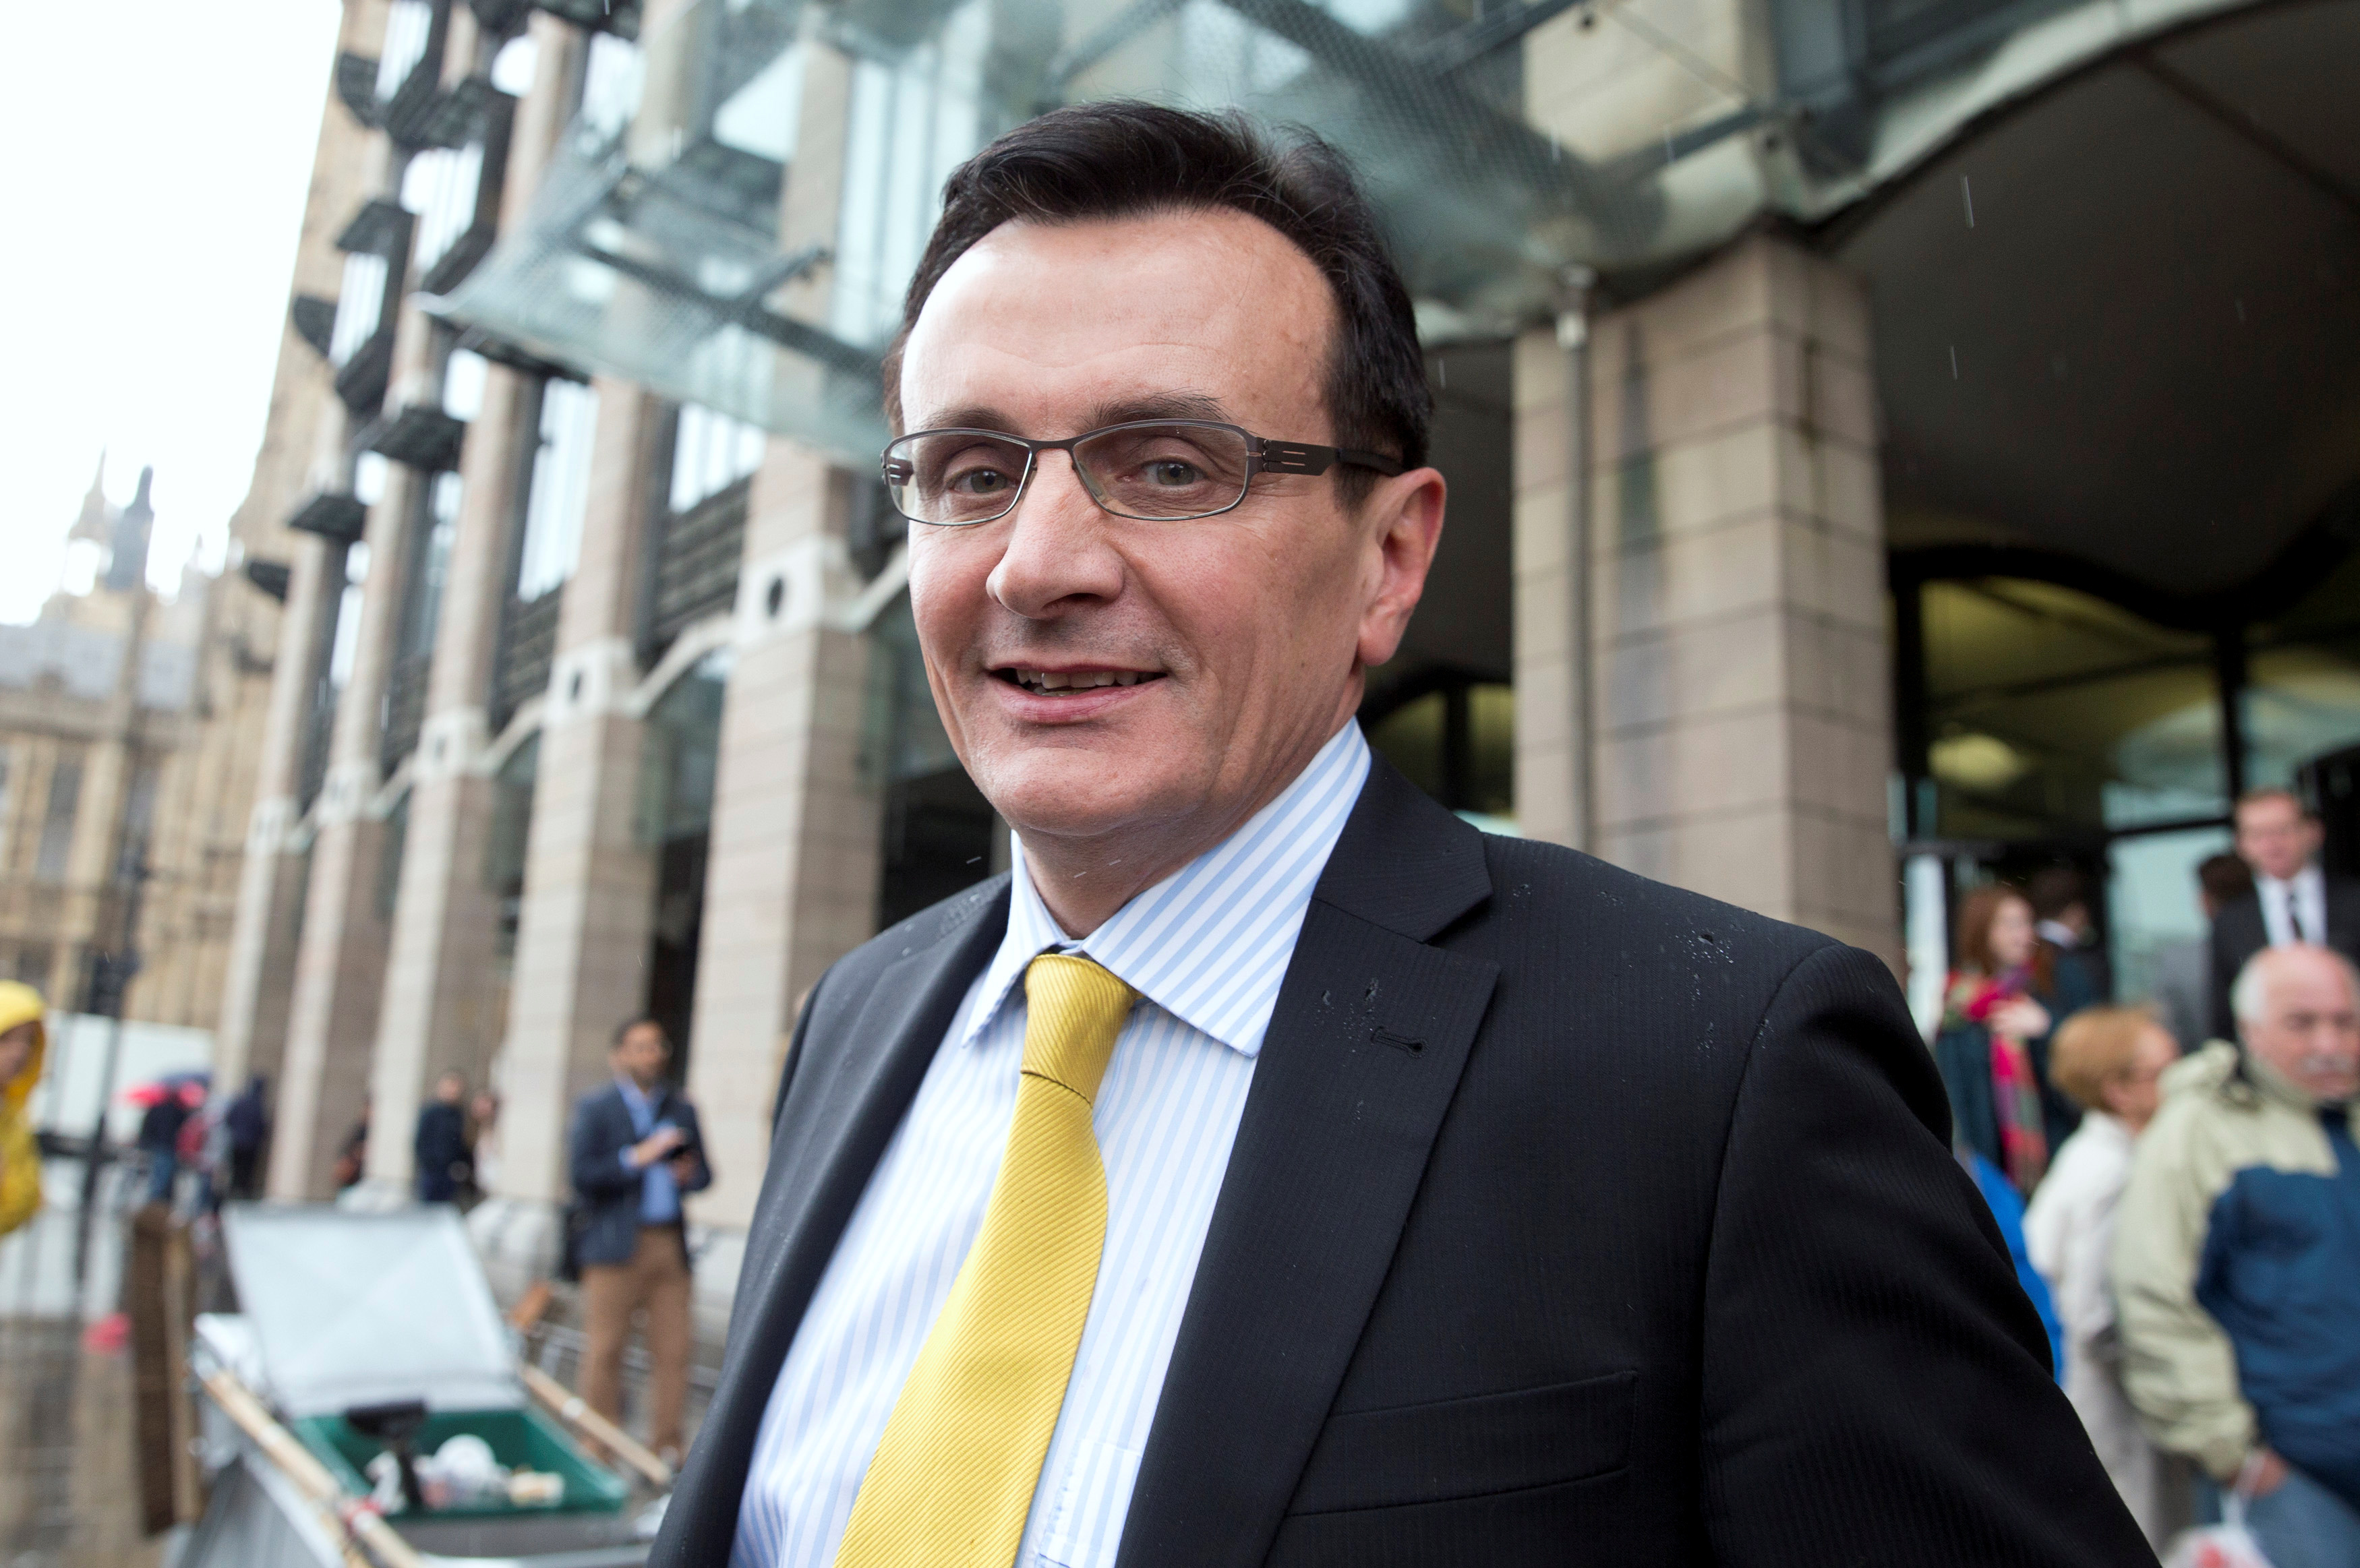 Chief Executive of AstraZeneca Pascal Soriot leaves after appearing at a parliamentary business and enterprise committee hearing at Portcullis House in London